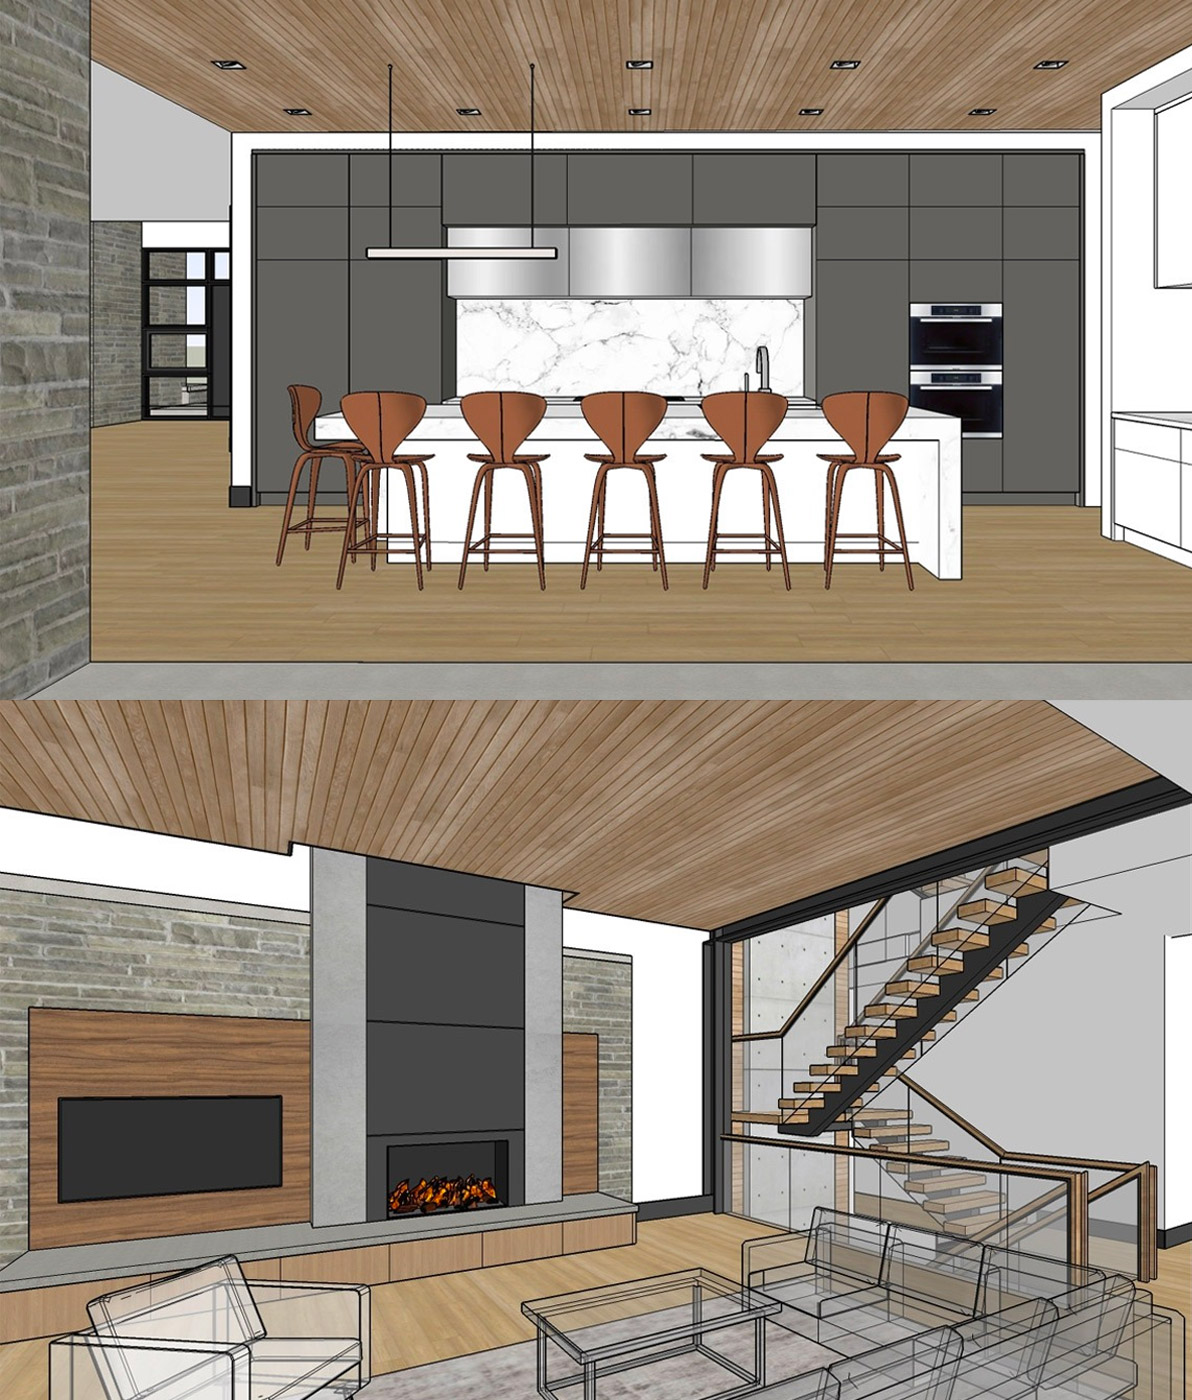 3d rendering of kitchen and family room with stone wall, wood ceiling and hardwood floor.